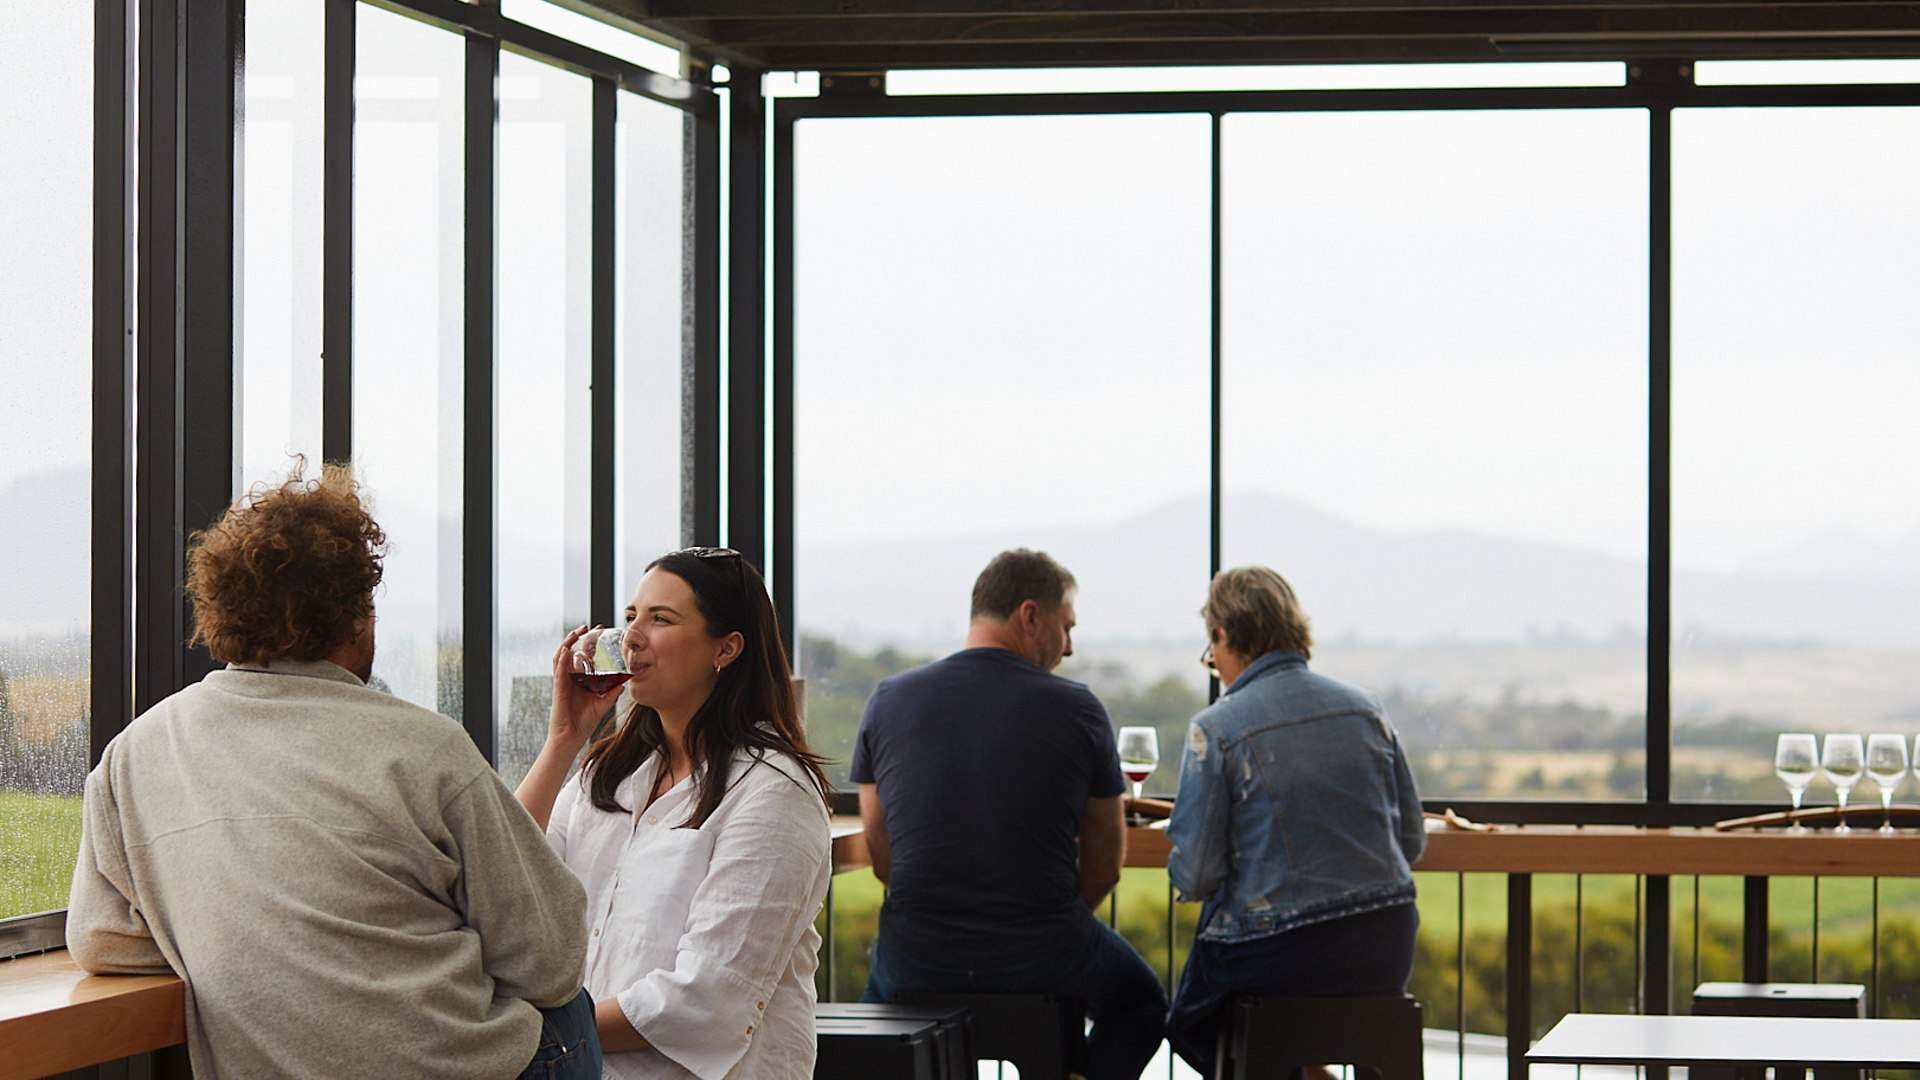 Famed Tassie Winery Devil's Corner Has Unveiled Its Ambitious Cellar Door Makeover